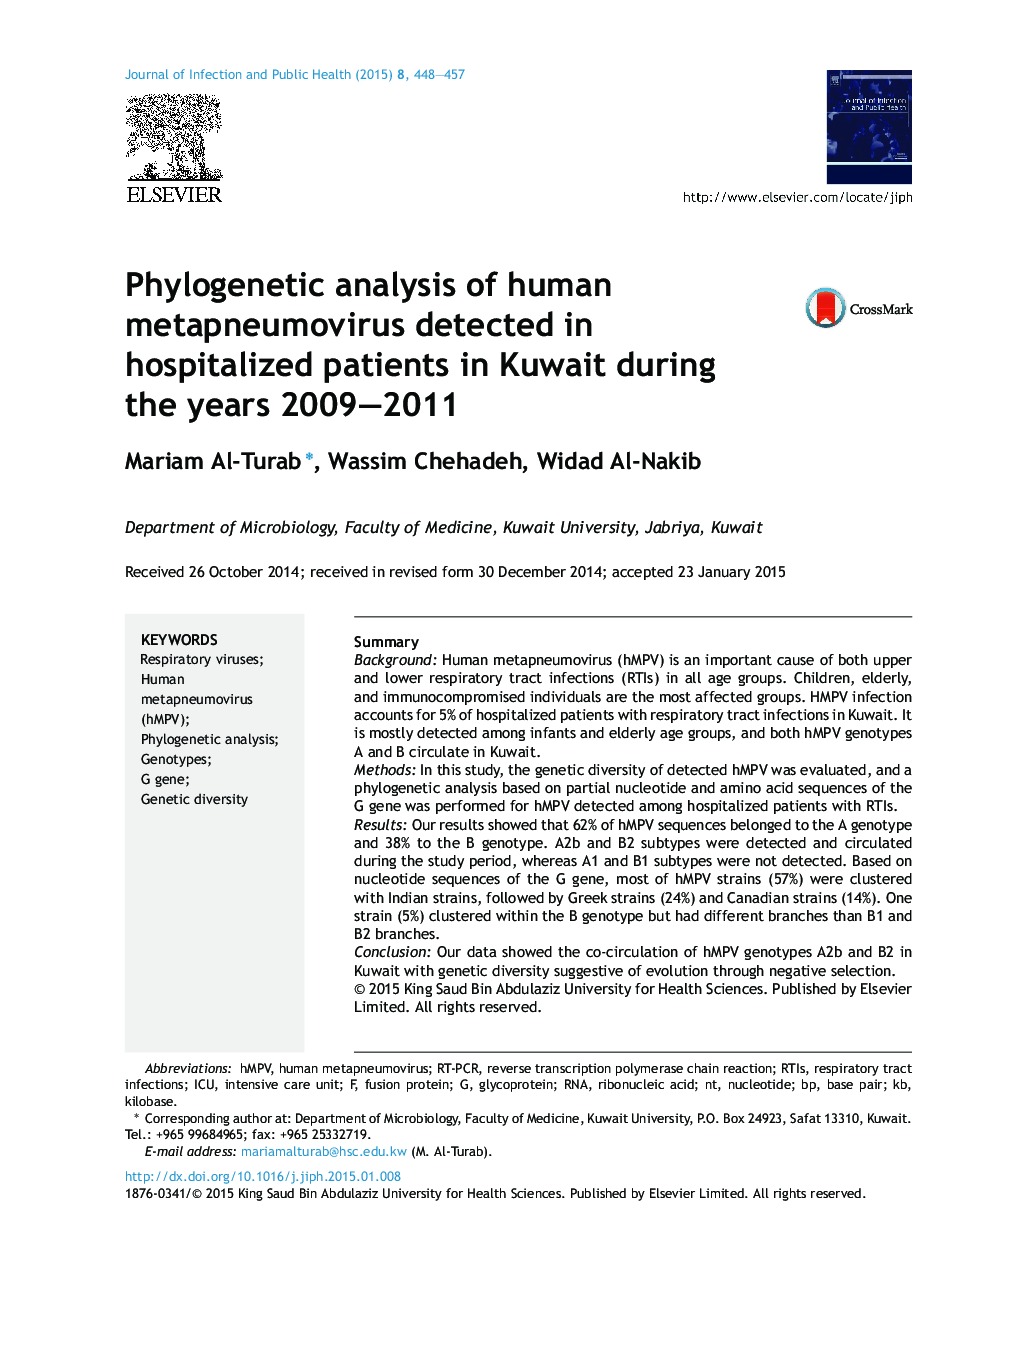 Phylogenetic analysis of human metapneumovirus detected in hospitalized patients in Kuwait during the years 2009–2011